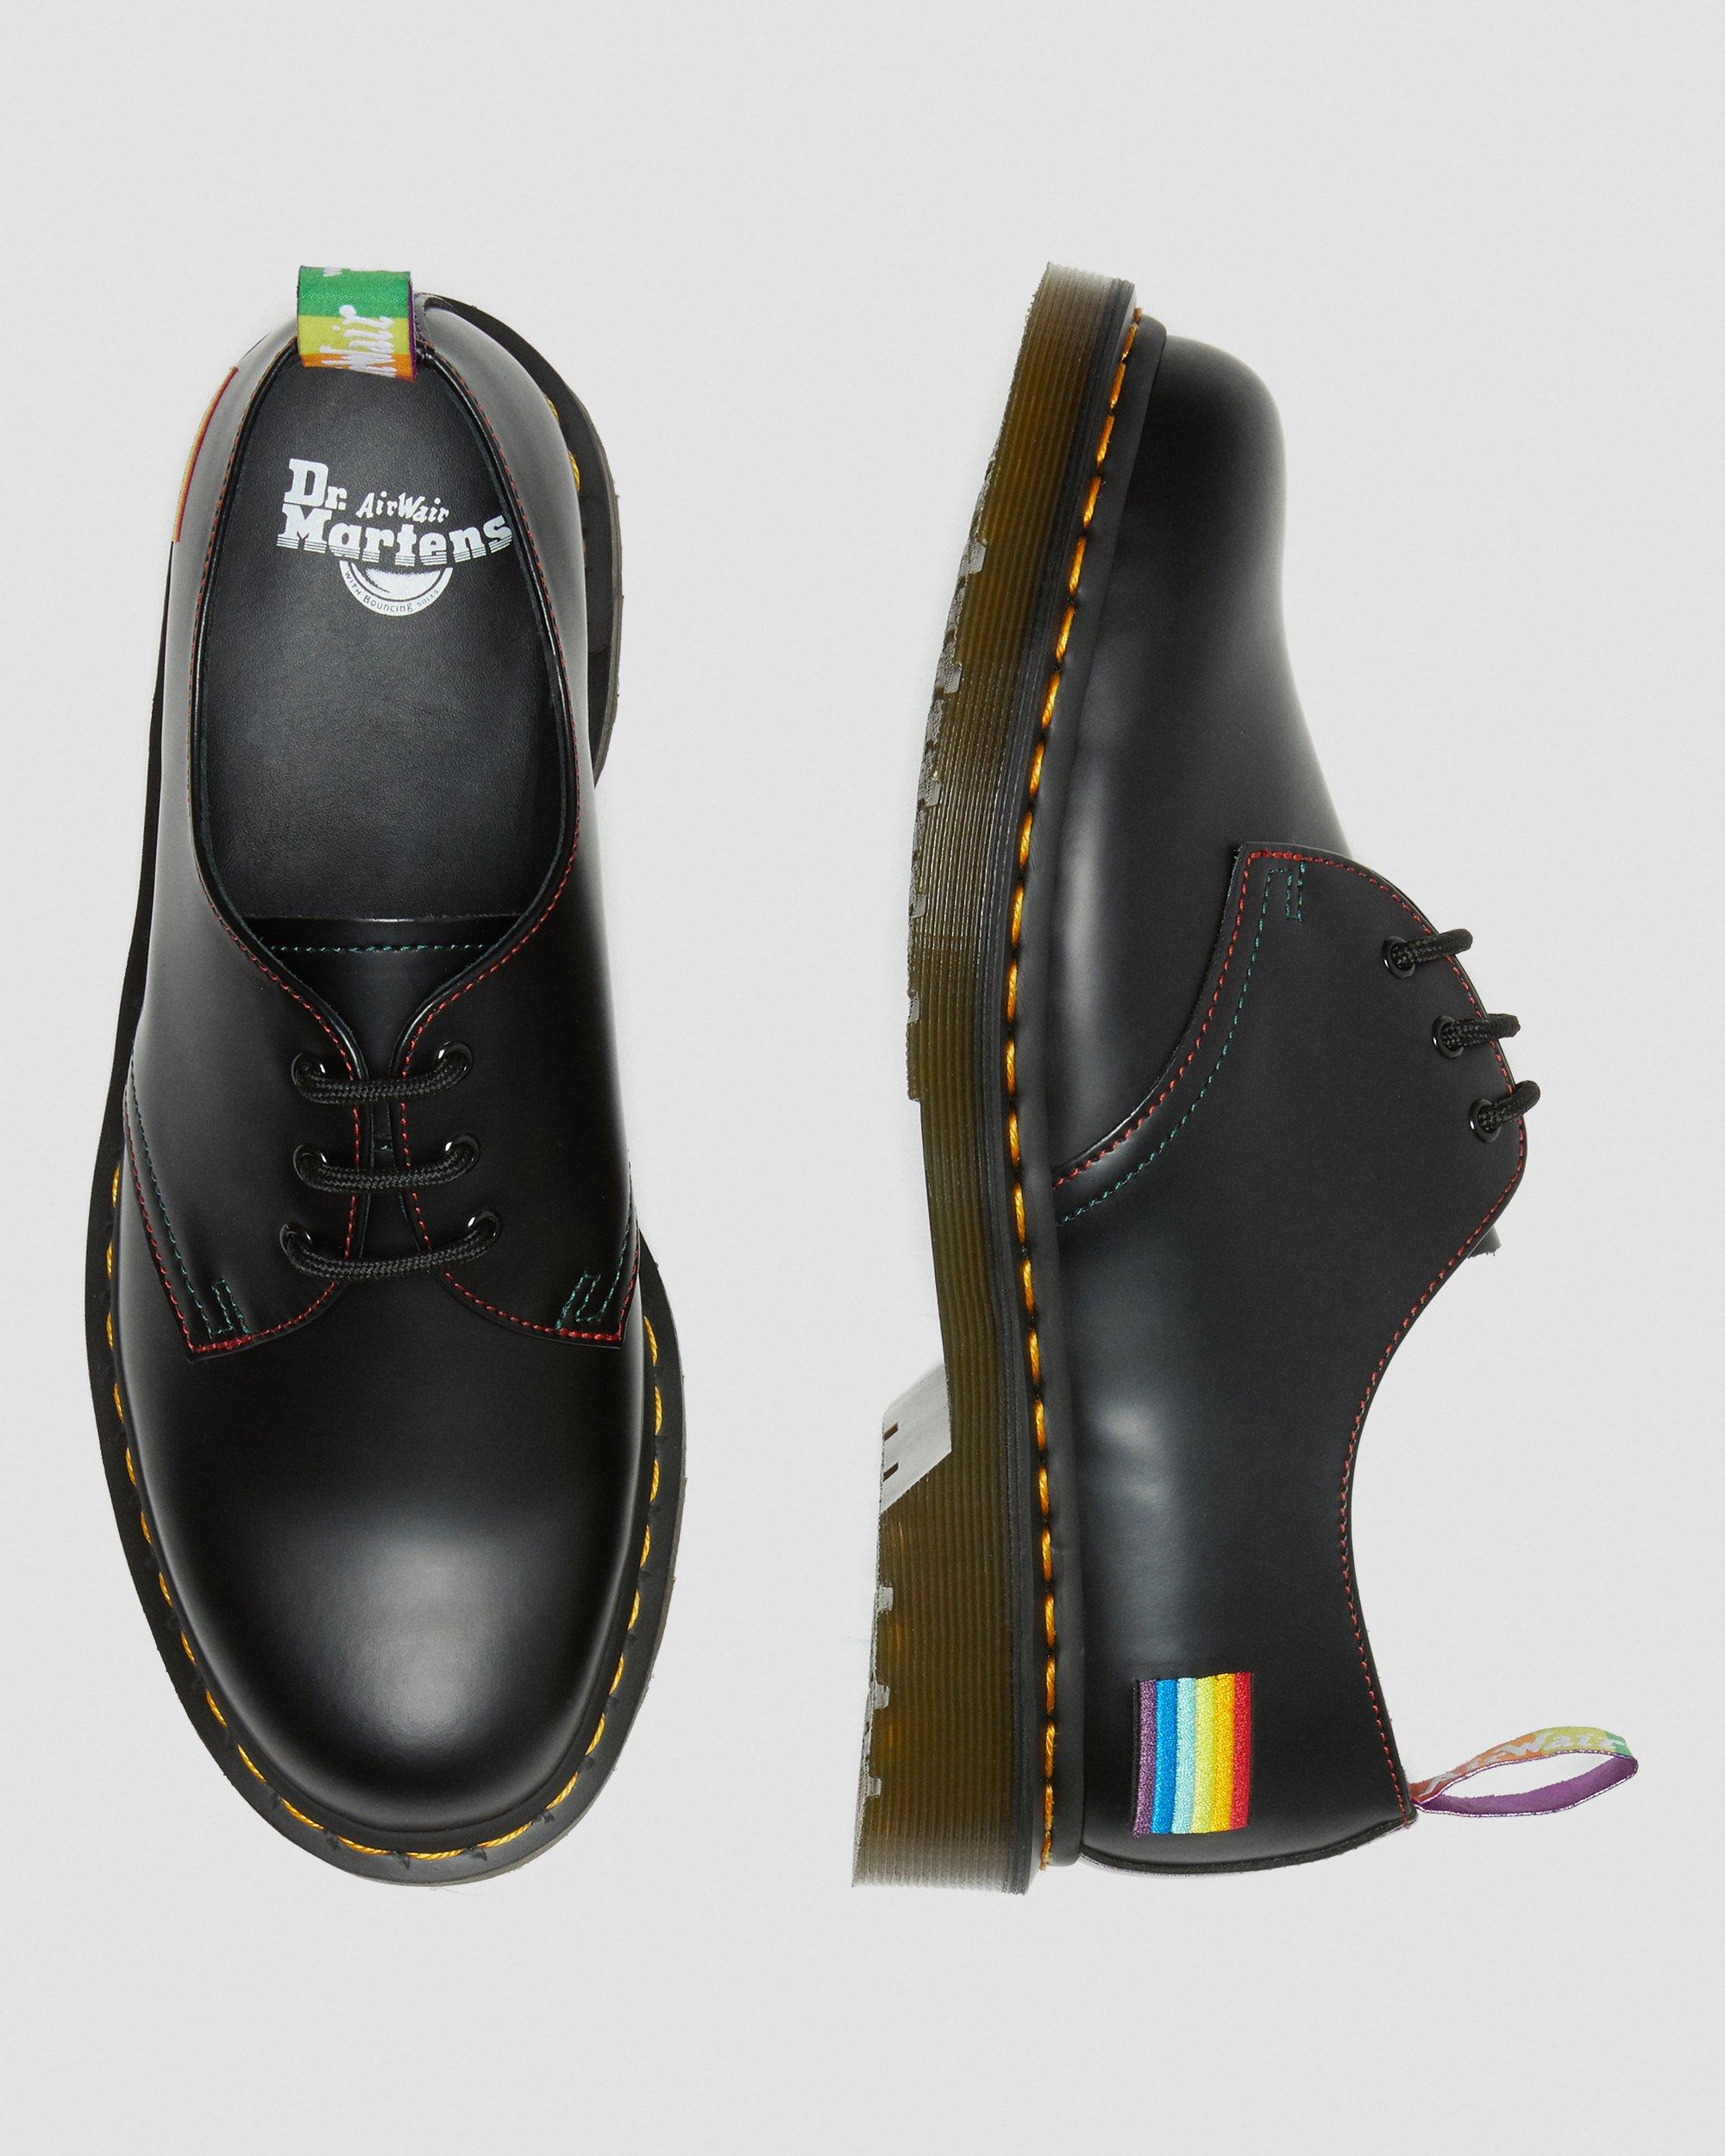 DR MARTENS 1461 For Pride Smooth Leather Oxford Shoes